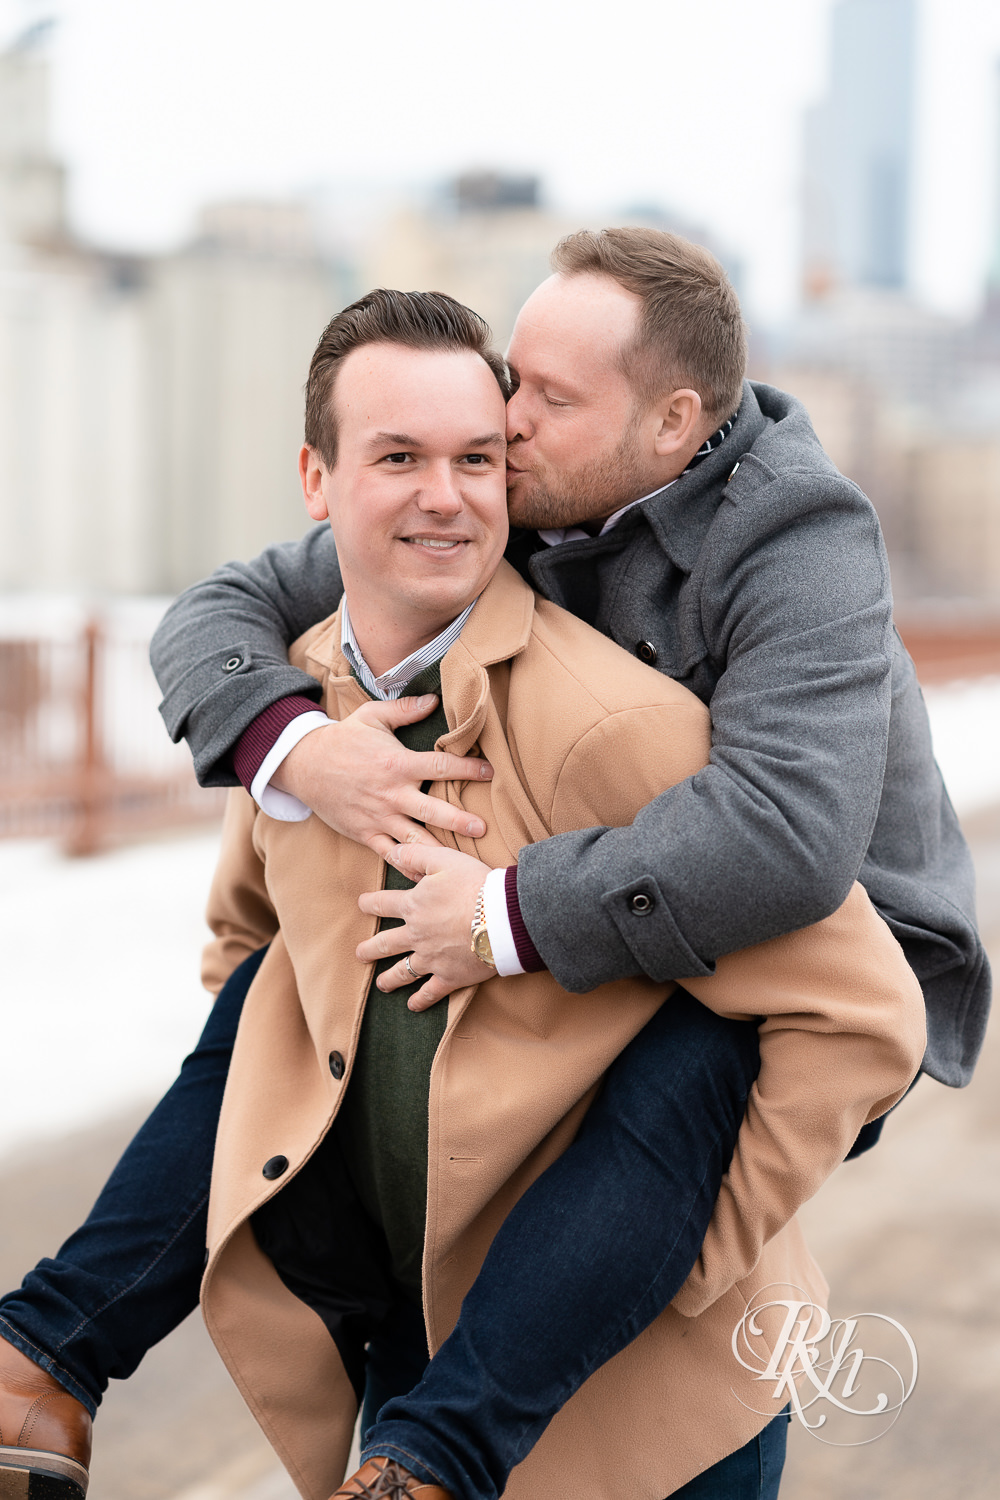 Gay men do a piggy back ride on the Stone Arch Bridge during the winter in Minneapolis, Minnesota.